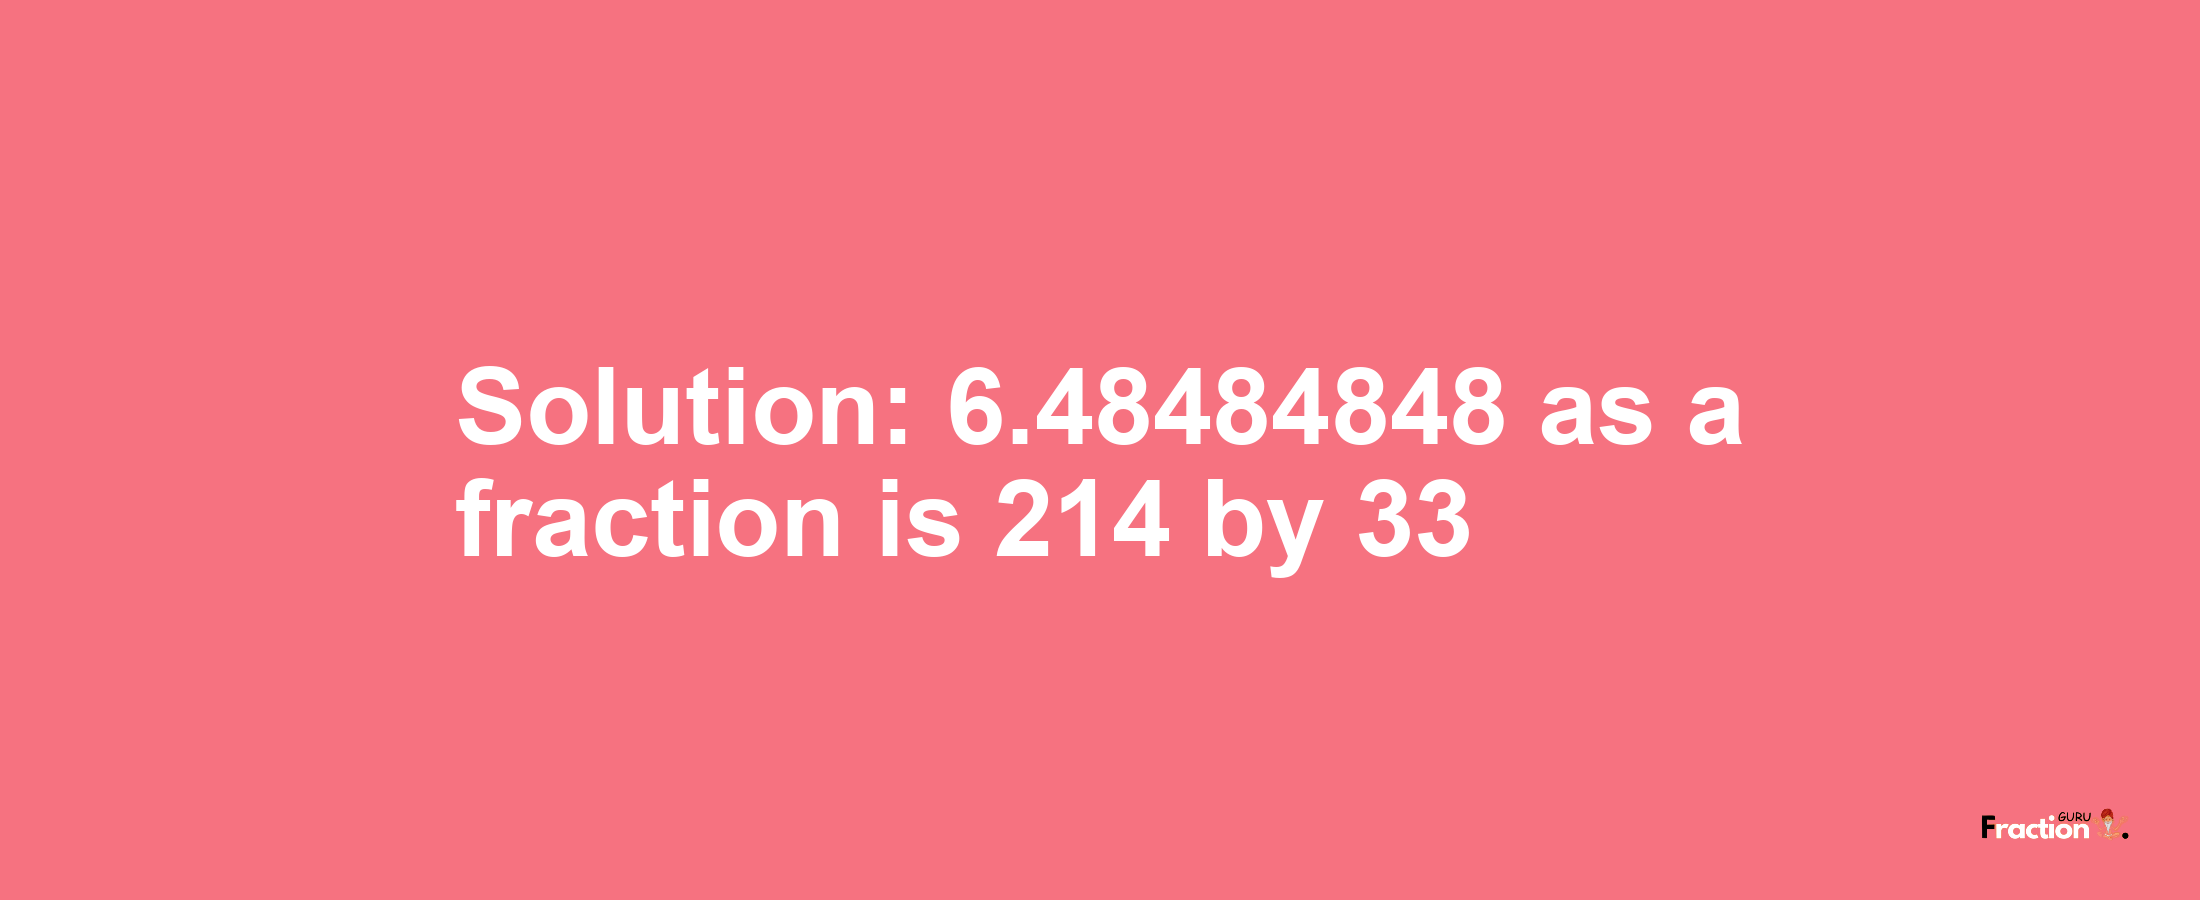 Solution:6.48484848 as a fraction is 214/33